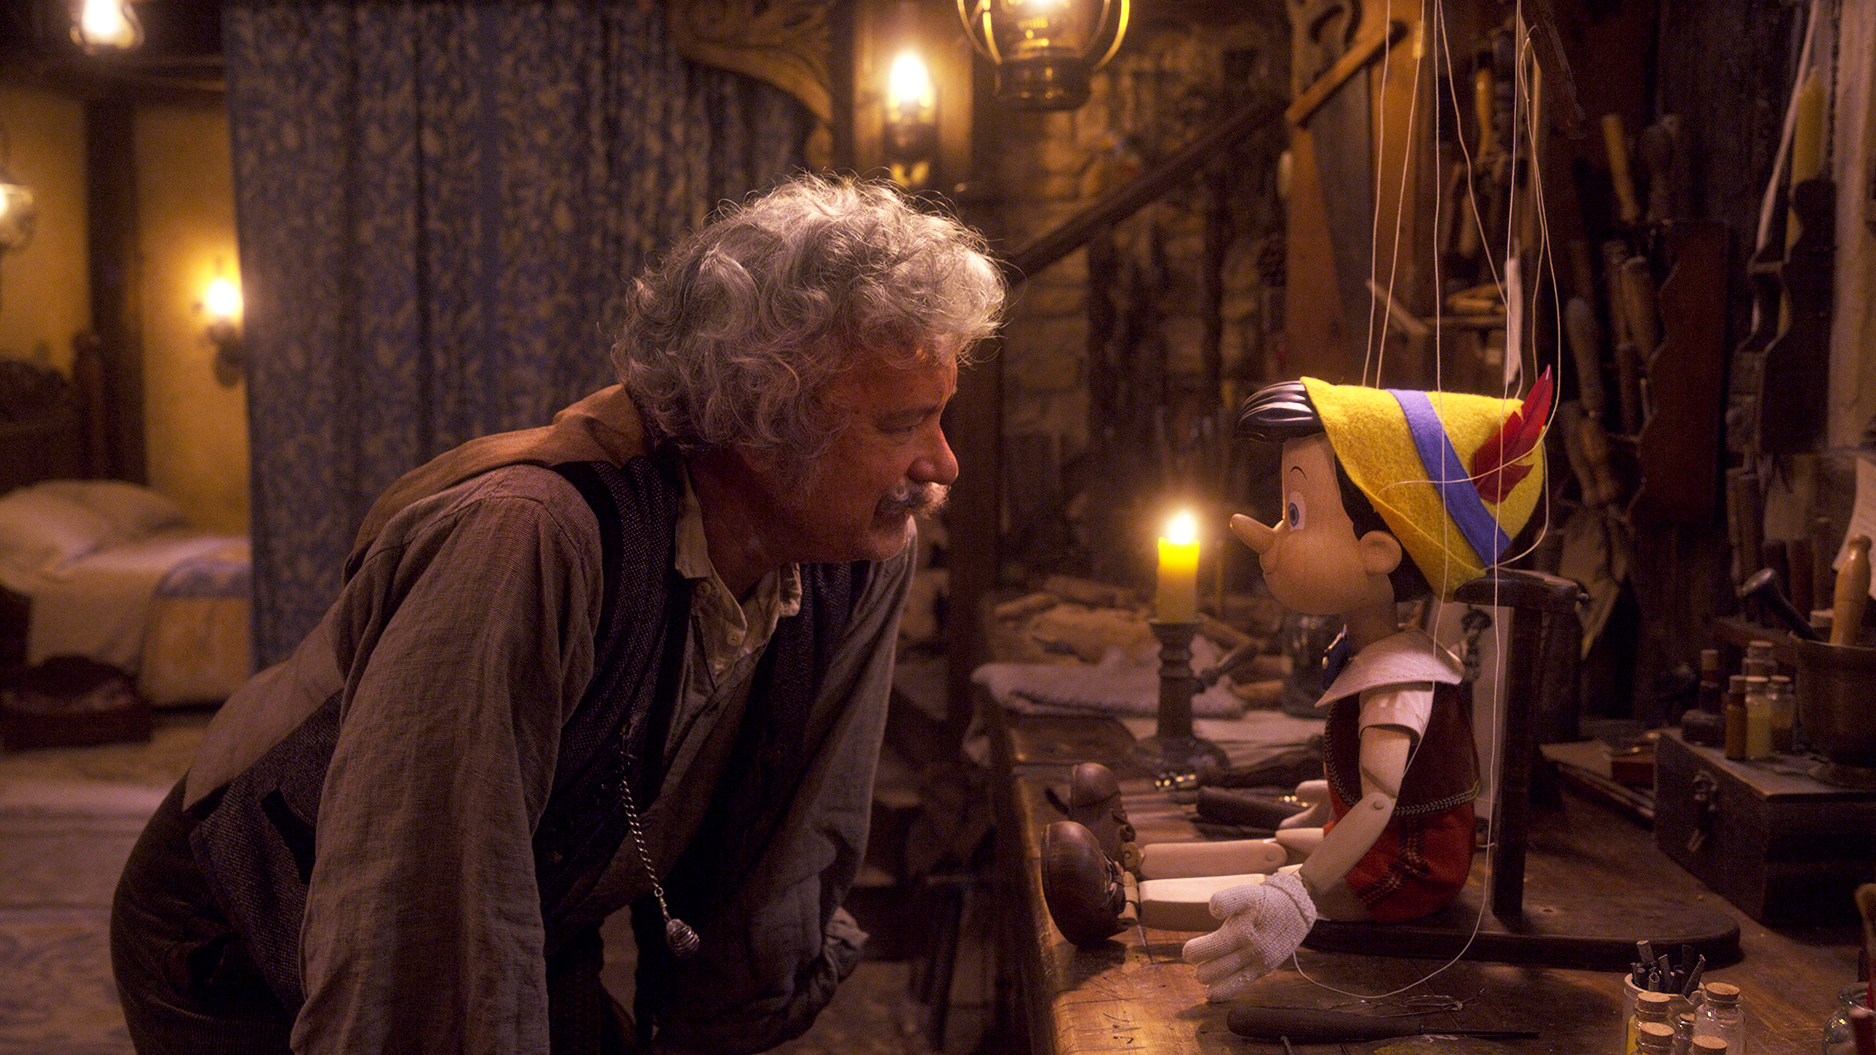 Tom Hanks as Geppetto with Pinocchio in the Pinocchio live-action movie